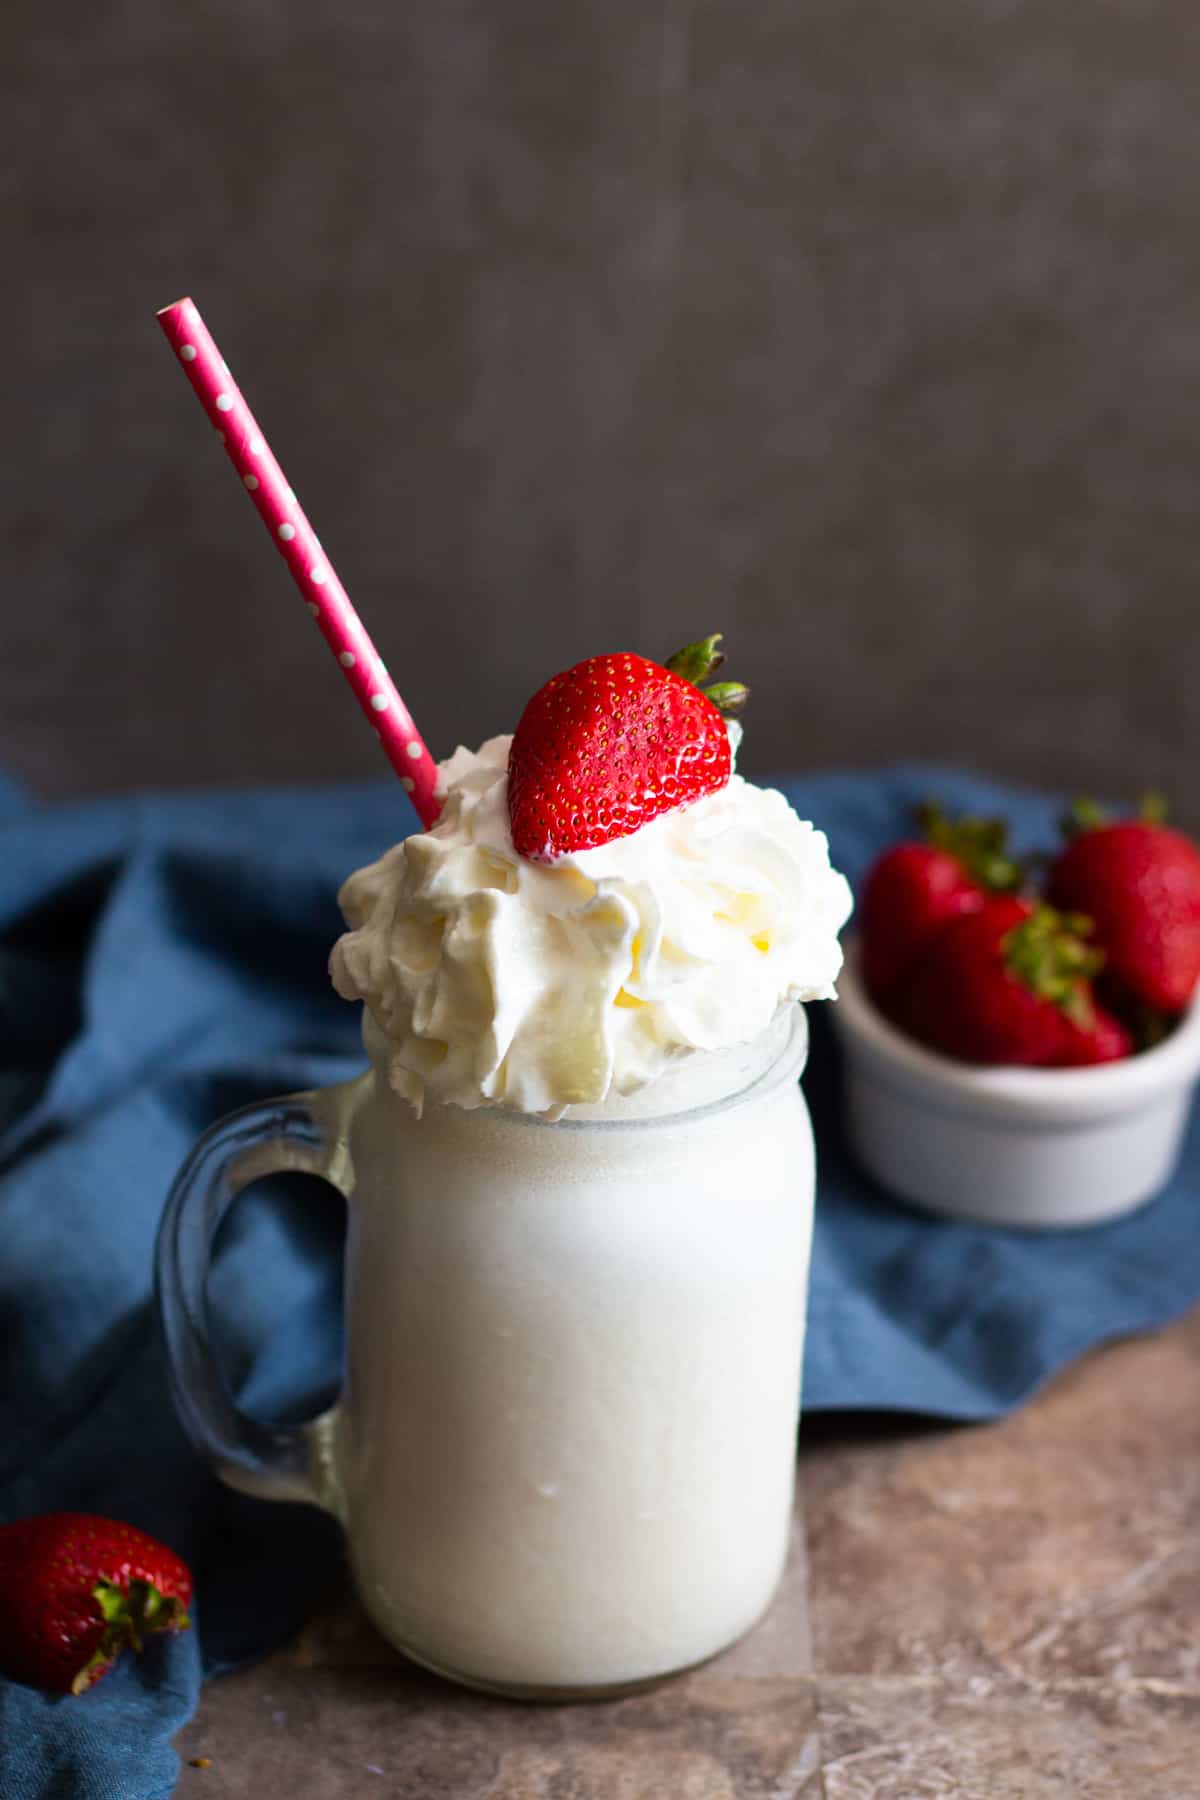 how to make a milkshake - A glass of vanilla milkshake topped with strawberries and whipped cream.